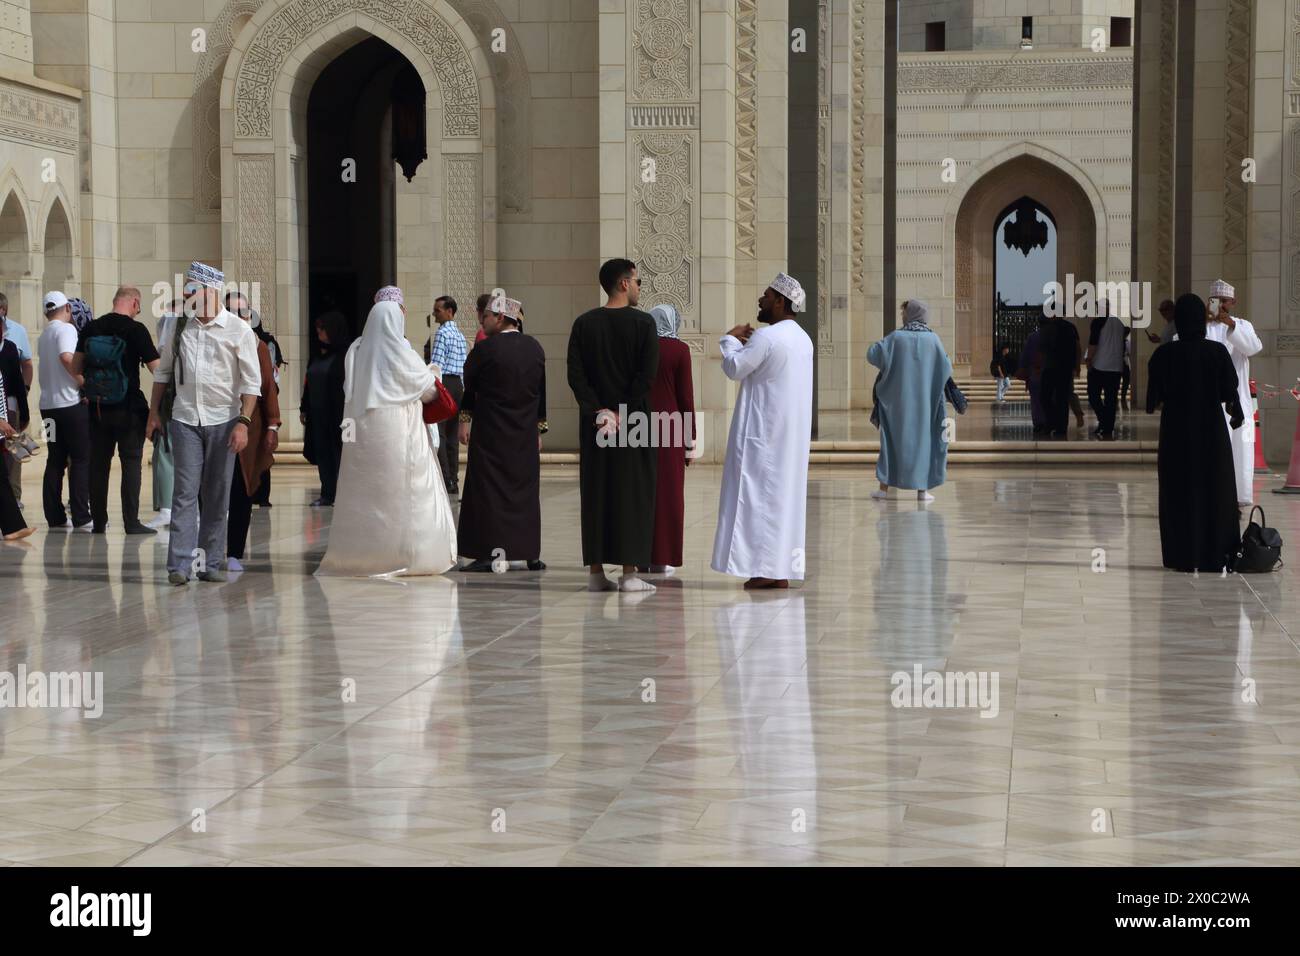 Sultan Qaboos Grand Mosque Tour Guide with Tourists in Courtyard (Sahn) Muscat Oman Stock Photo